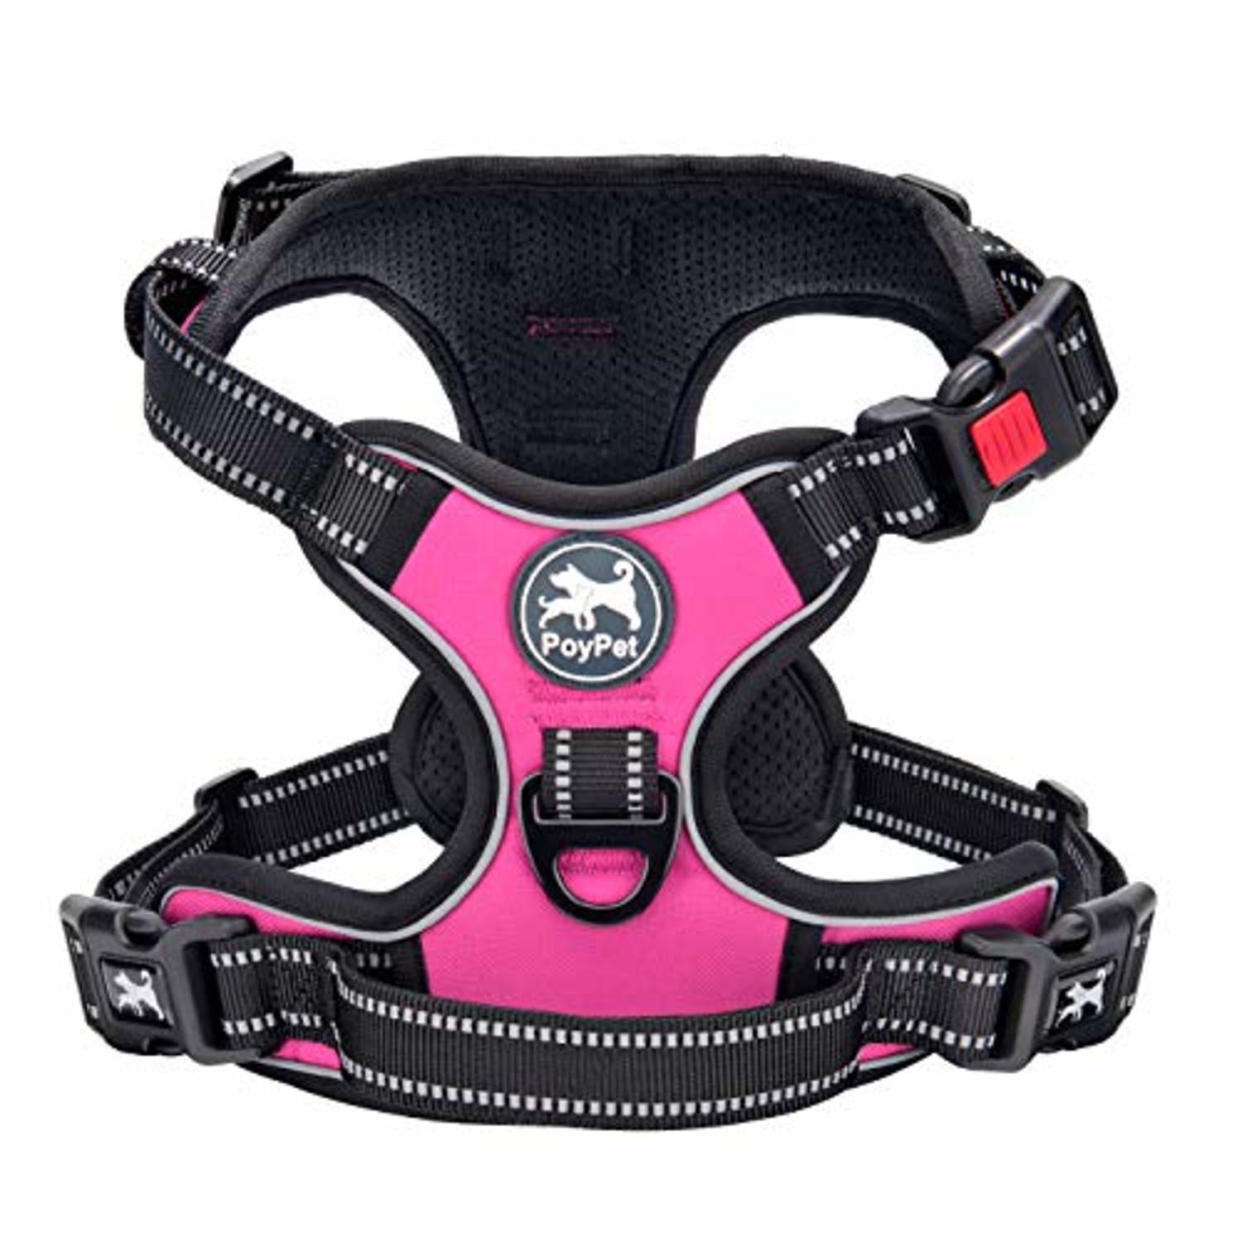 PoyPet No Pull Dog Harness, No Choke Front Lead Dog Reflective Harness, Adjustable Soft Padded Pet Vest with Easy Control Handle for Small to Large Dogs(Pink,S) (AMAZON)